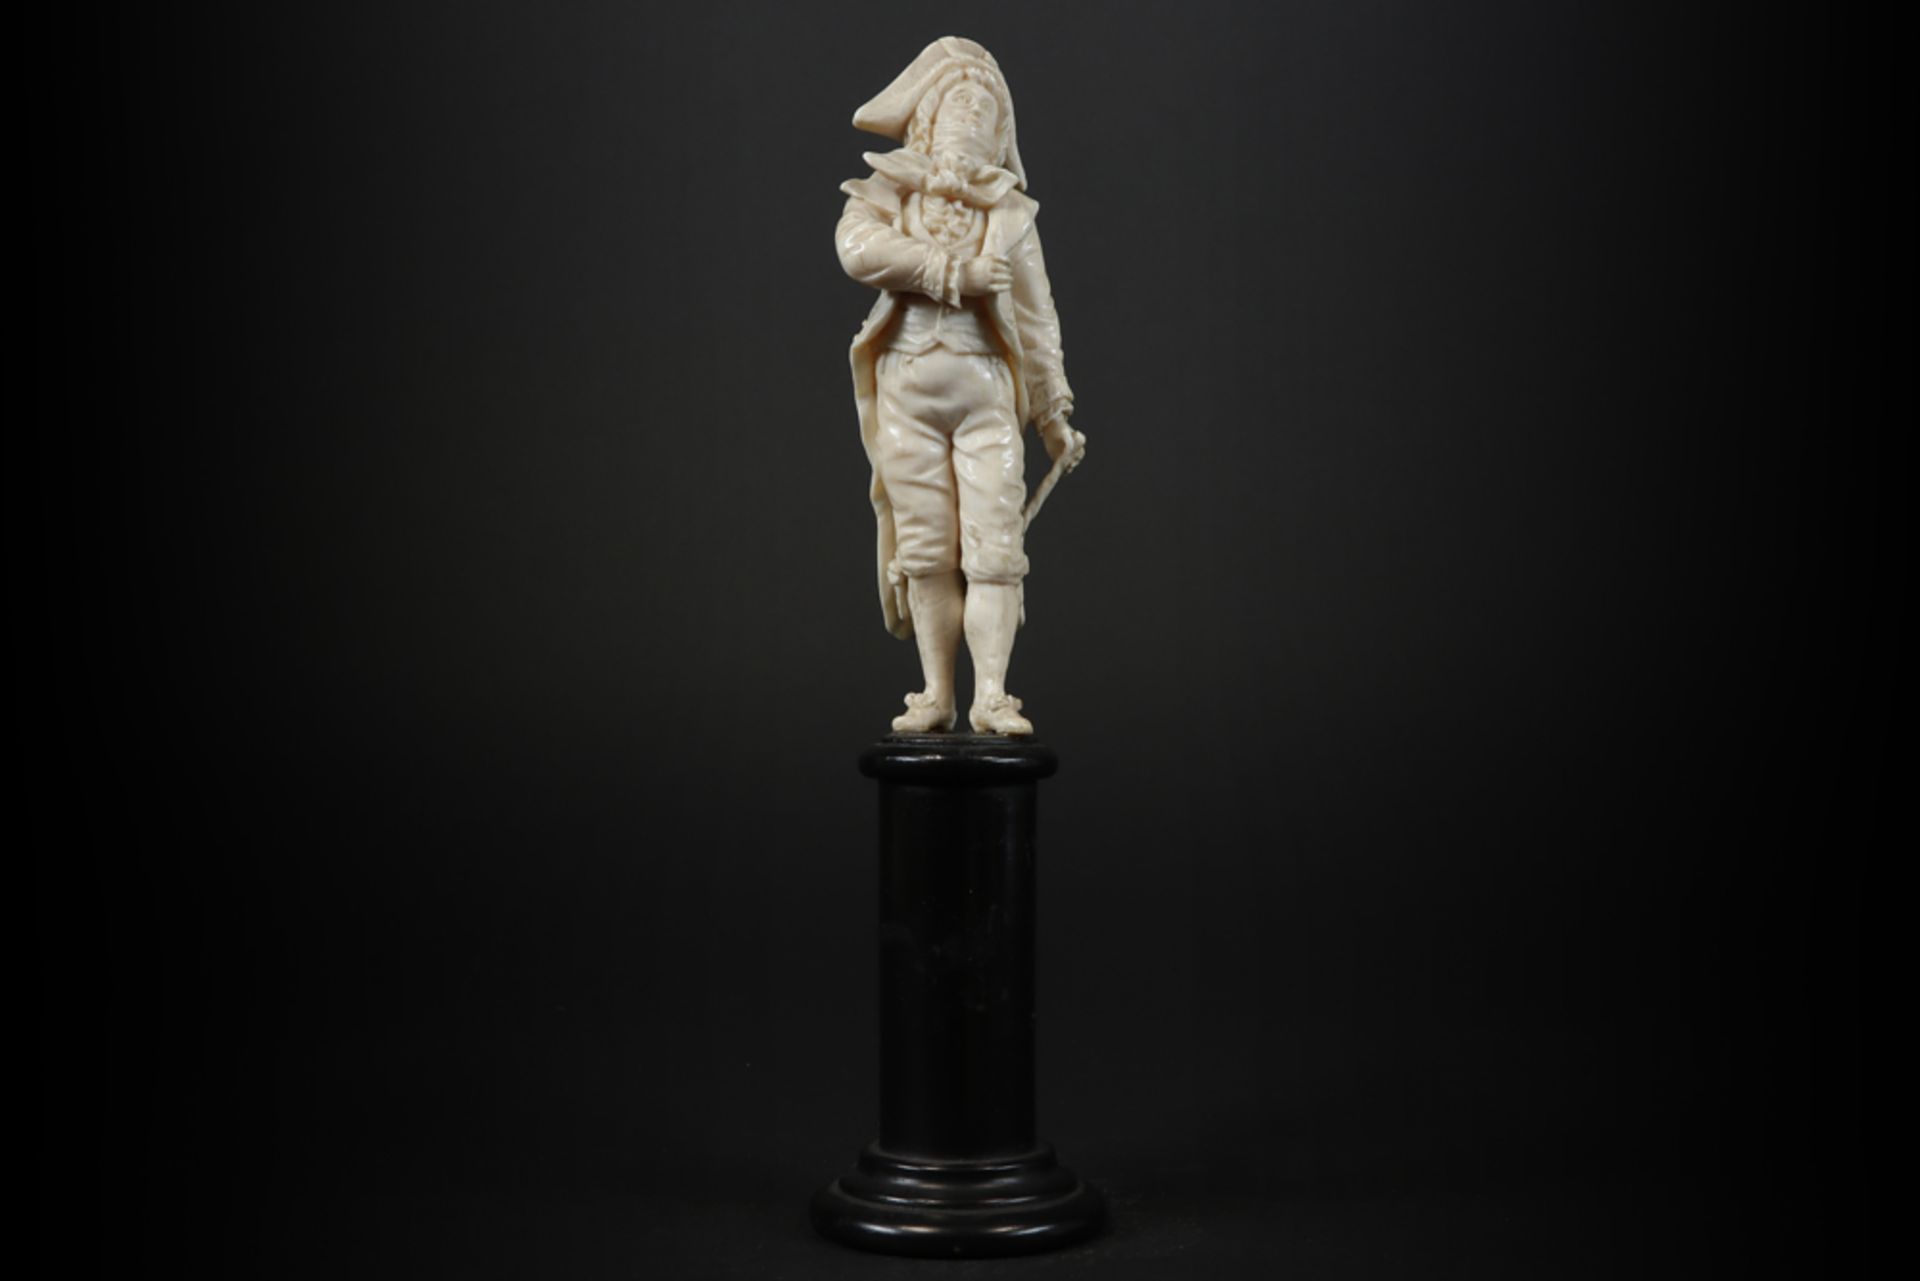 19th Cent. French sculpture in ivory, probably made in Dieppe - with European CITES certificate ||